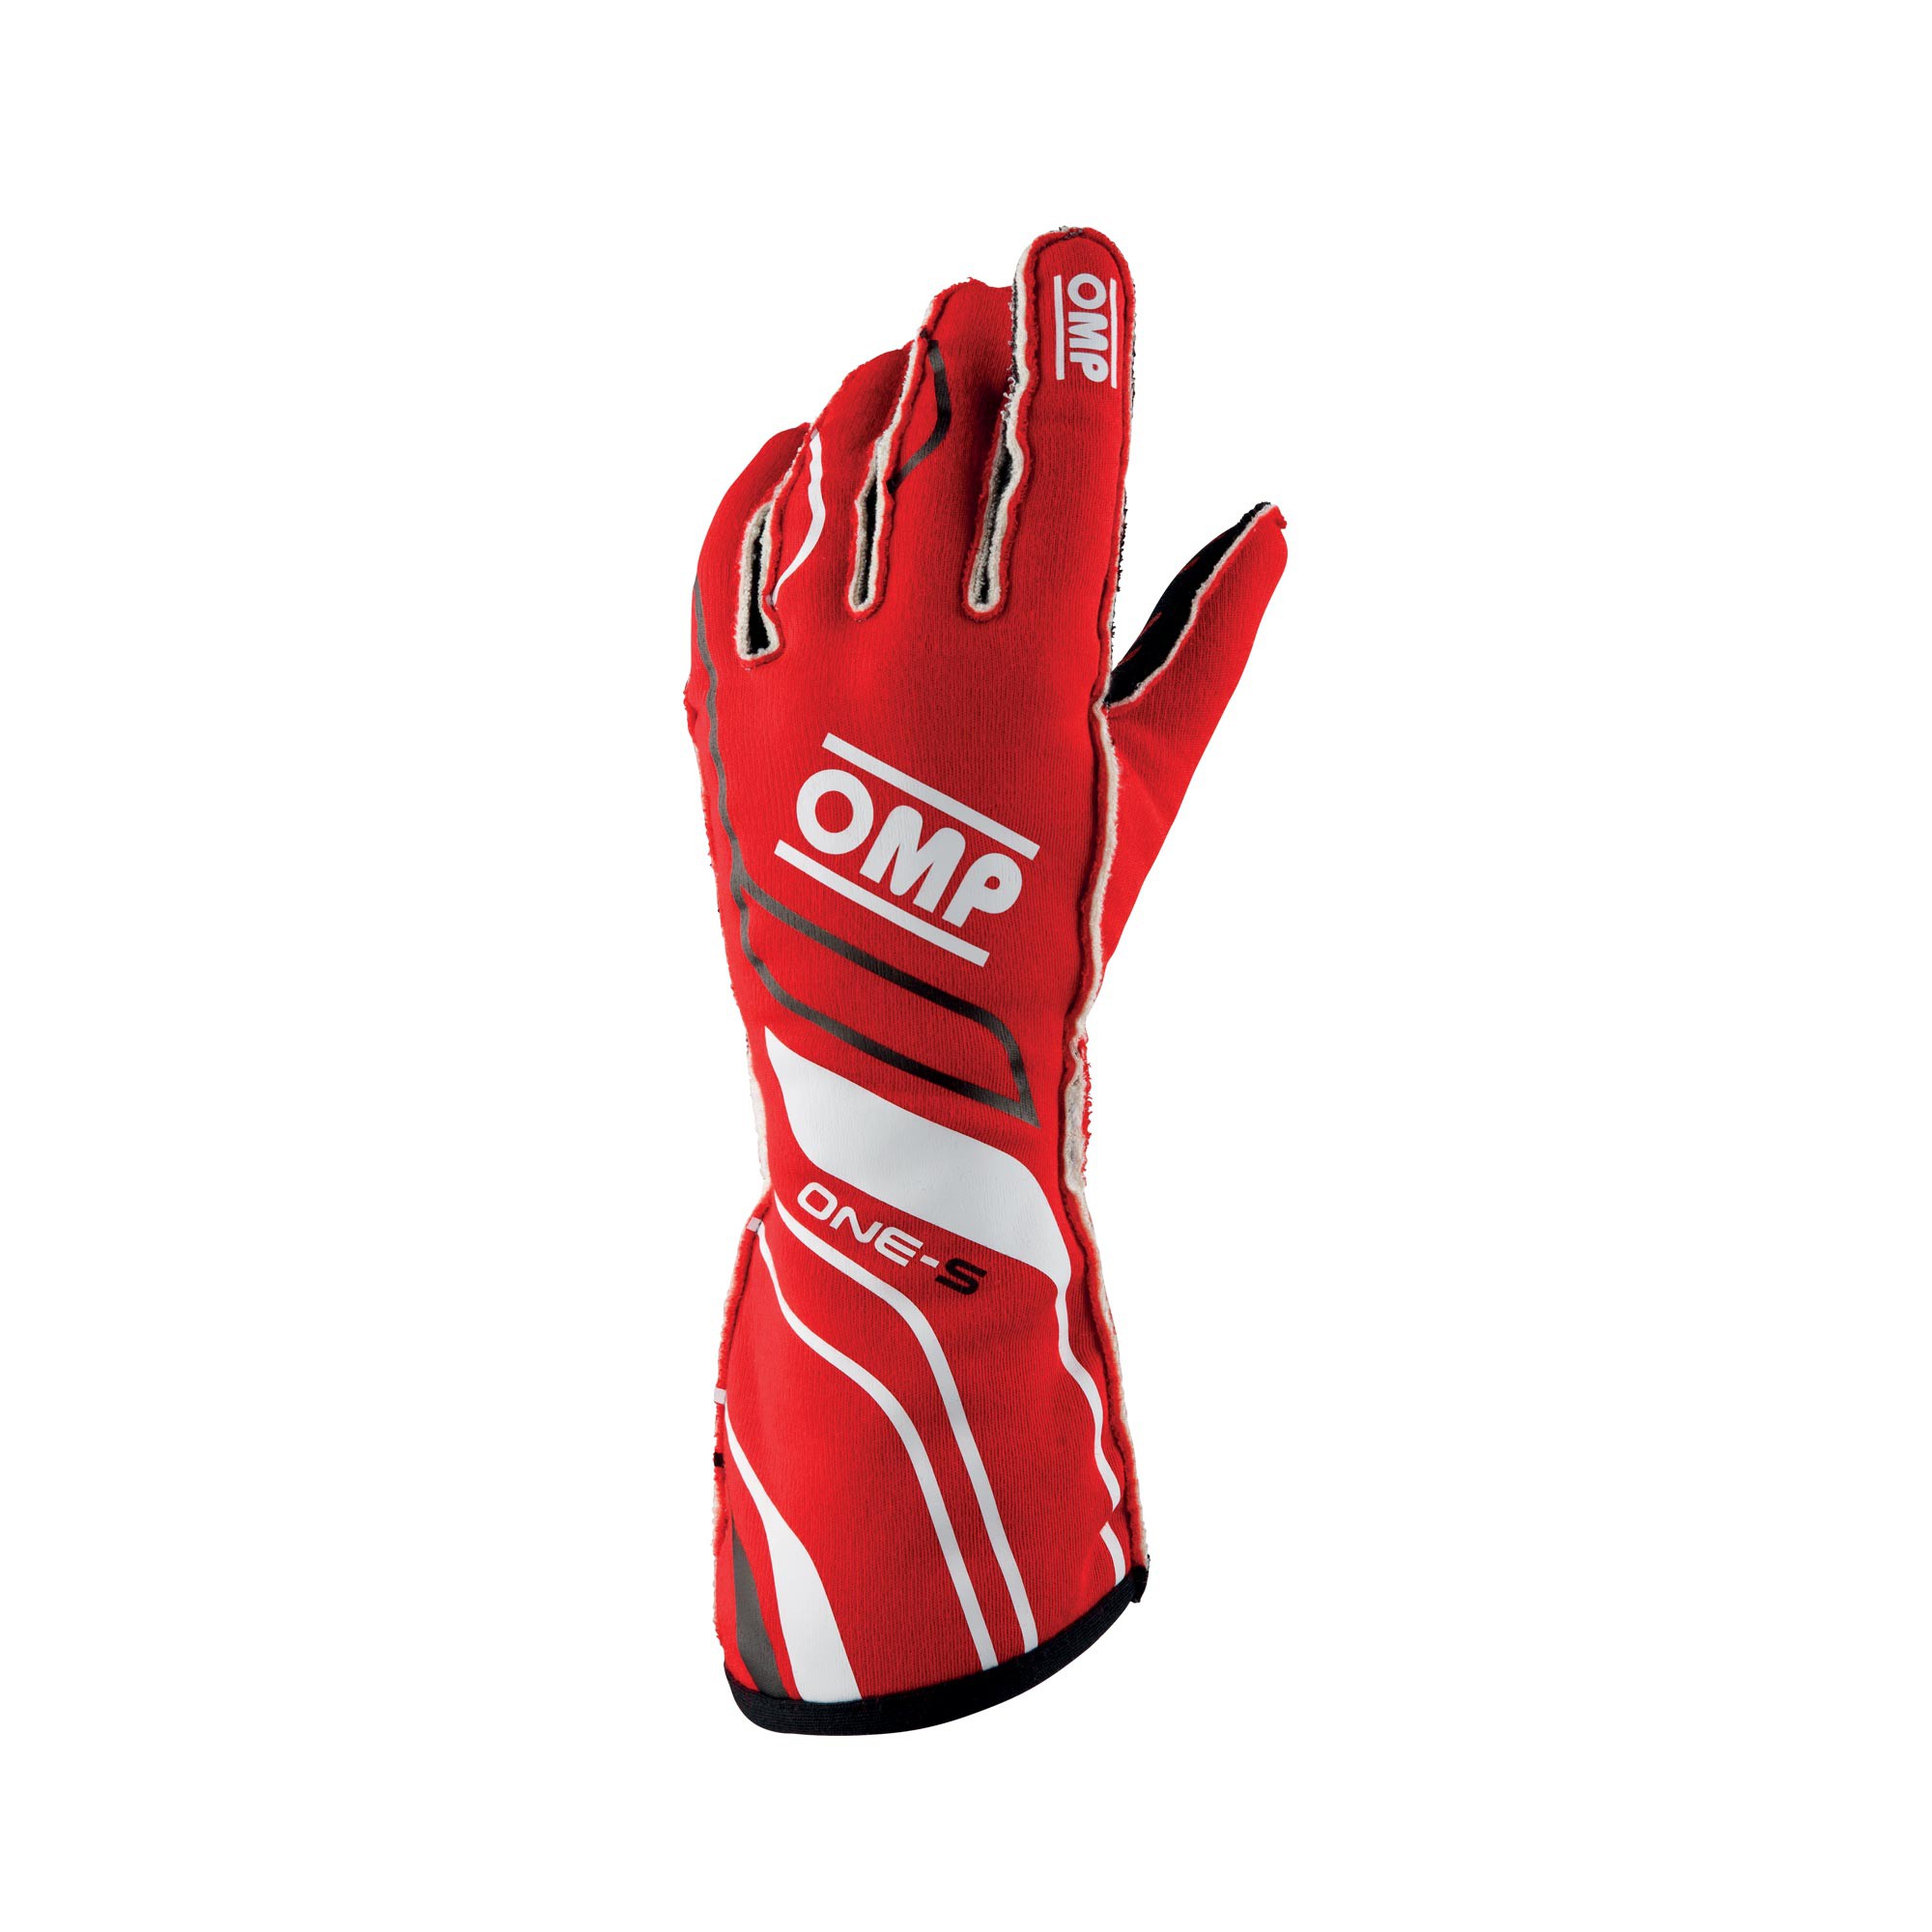 ONE-S GLOVES RED SIZE L FIA 8556-2018